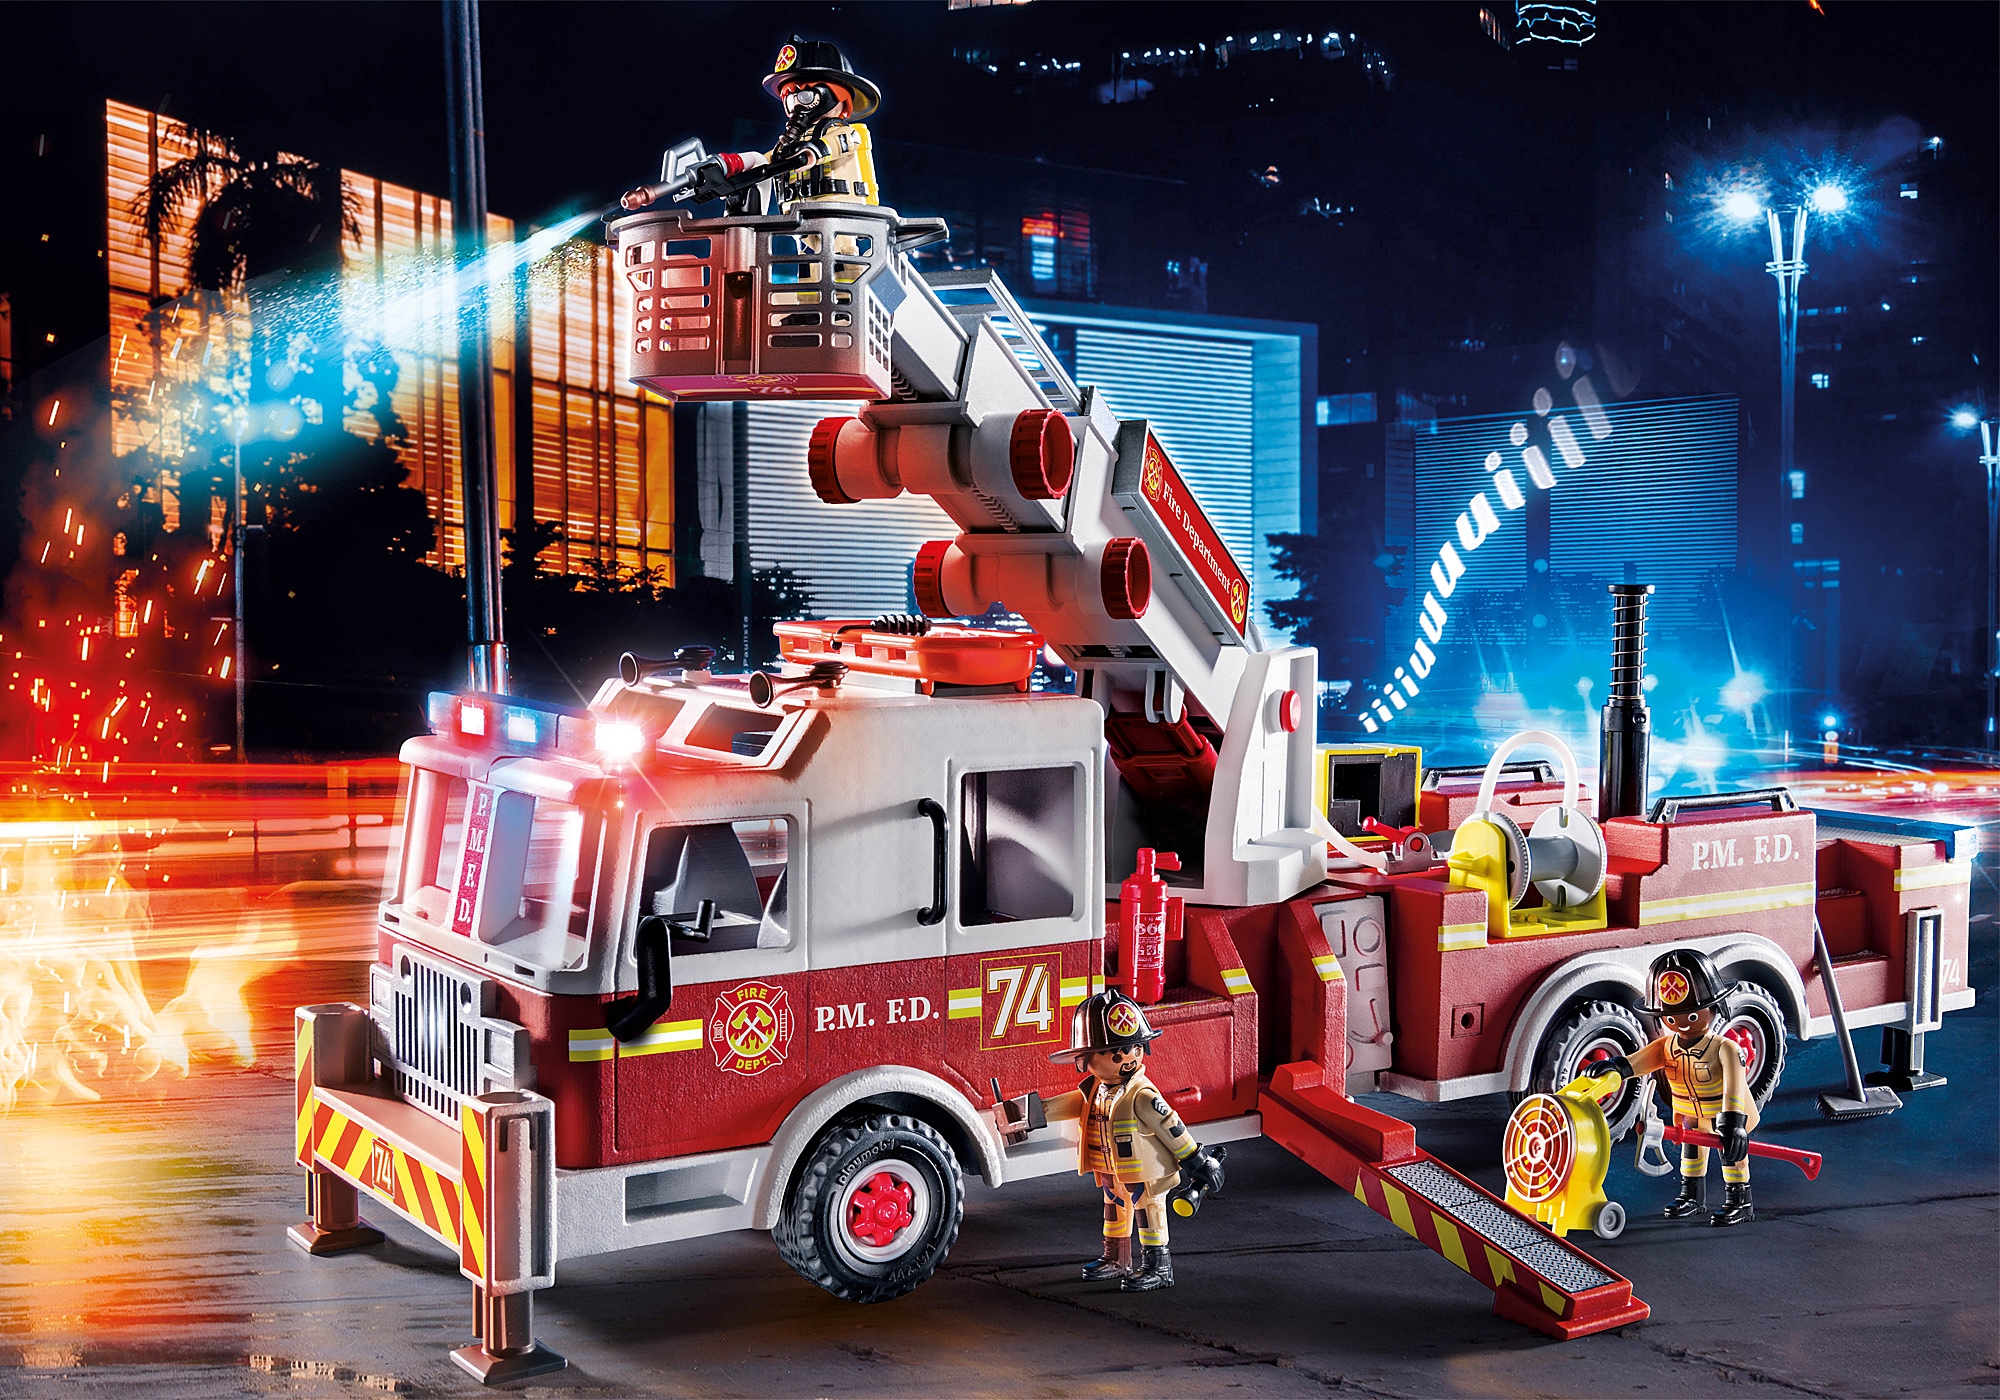 Rescue Vehicles: Fire Engine with Tower Ladder - 70935